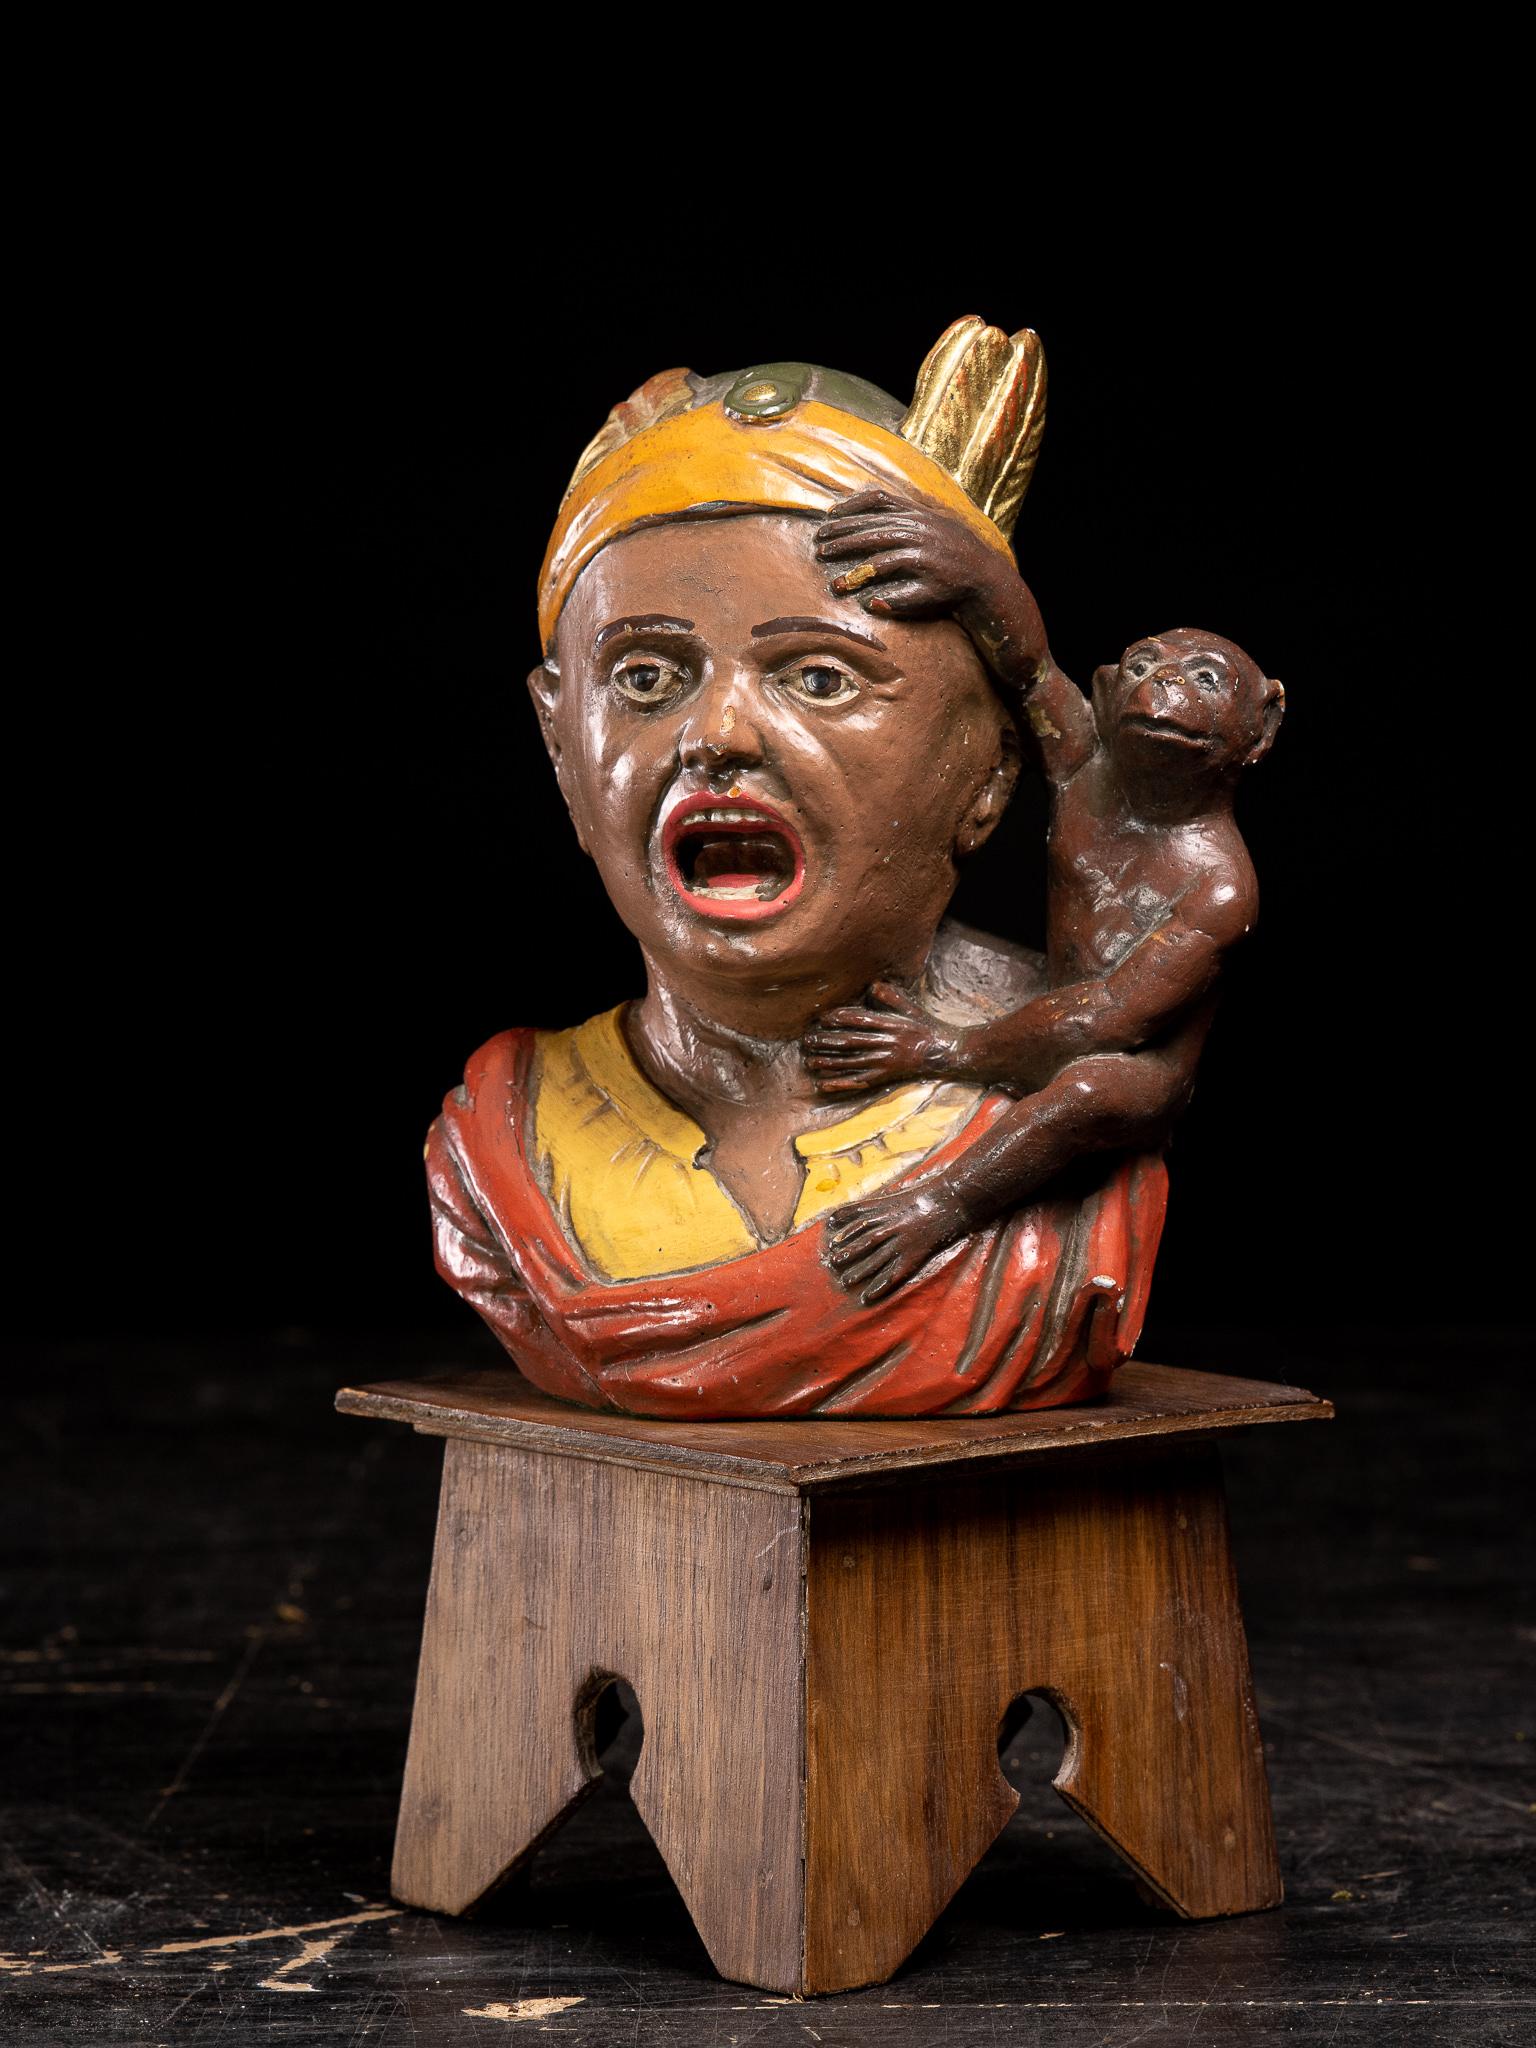 A gaper is a stone or wooden figurehead, often depicting a Moor, Muslim, or North African. The figurehead first appeared in the late 16th century as a hangout sign used outside the storefronts of drug stores in the Netherlands. The meaning of gaper